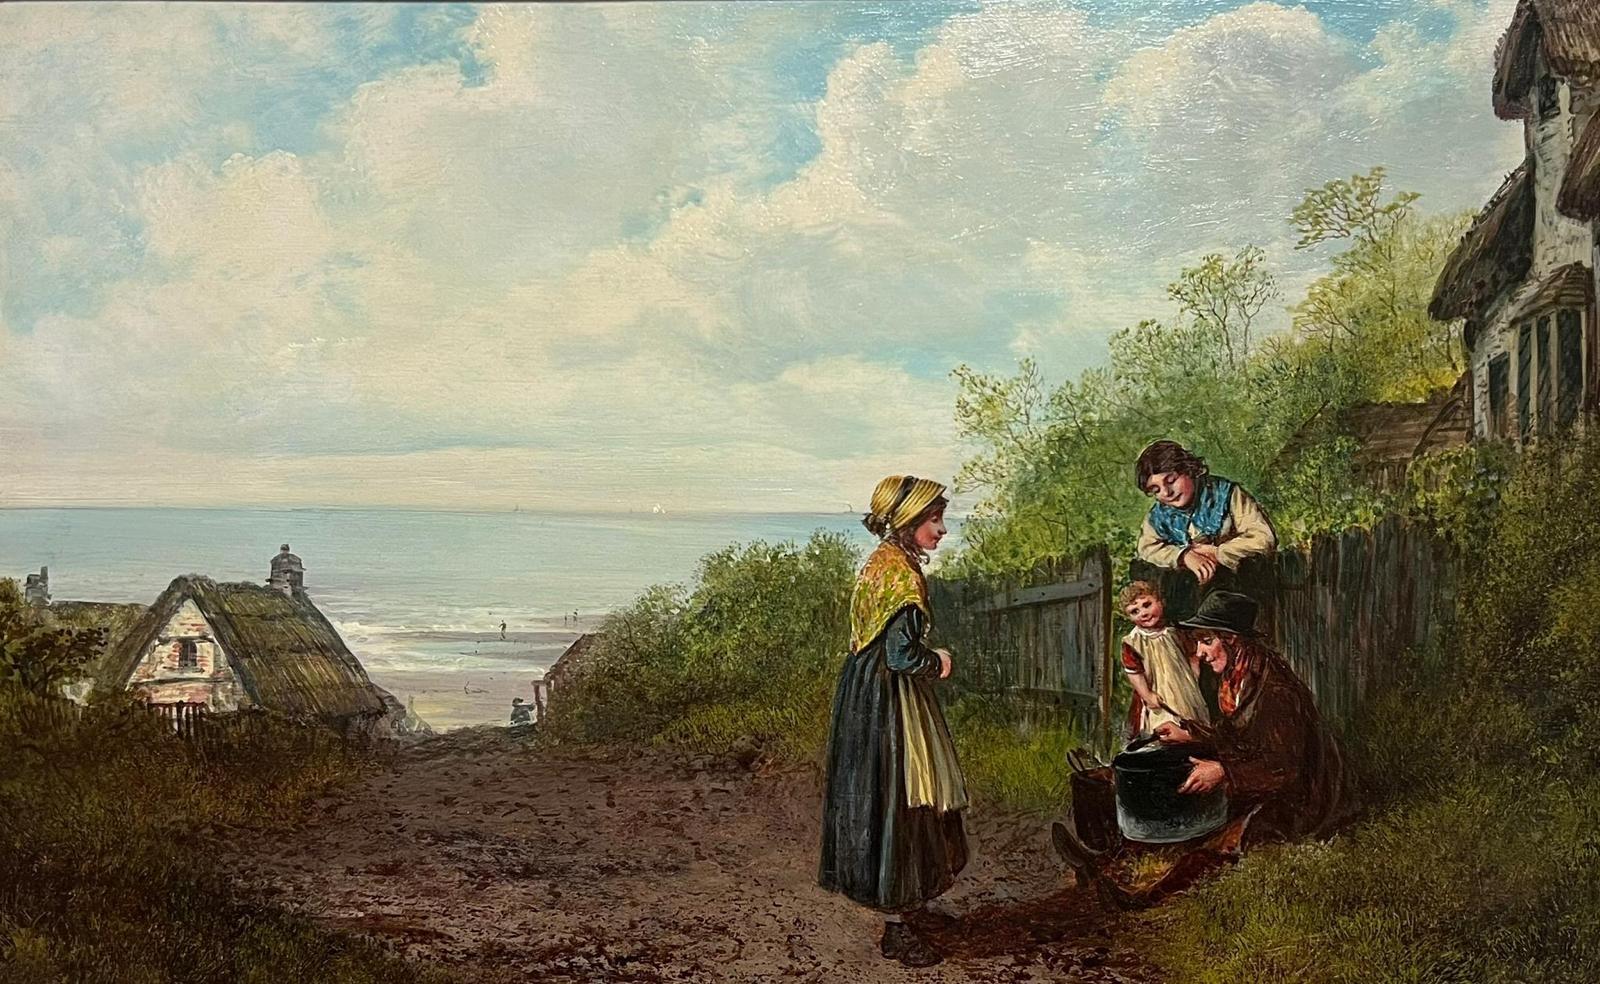 The Fisherfolk 
English School, 19th centurysigned oil on canvas, framed
framed: 17 x 23 inches
painting: 12 x 18 inches
provenance: private collection, England
condition: very good and sound condition